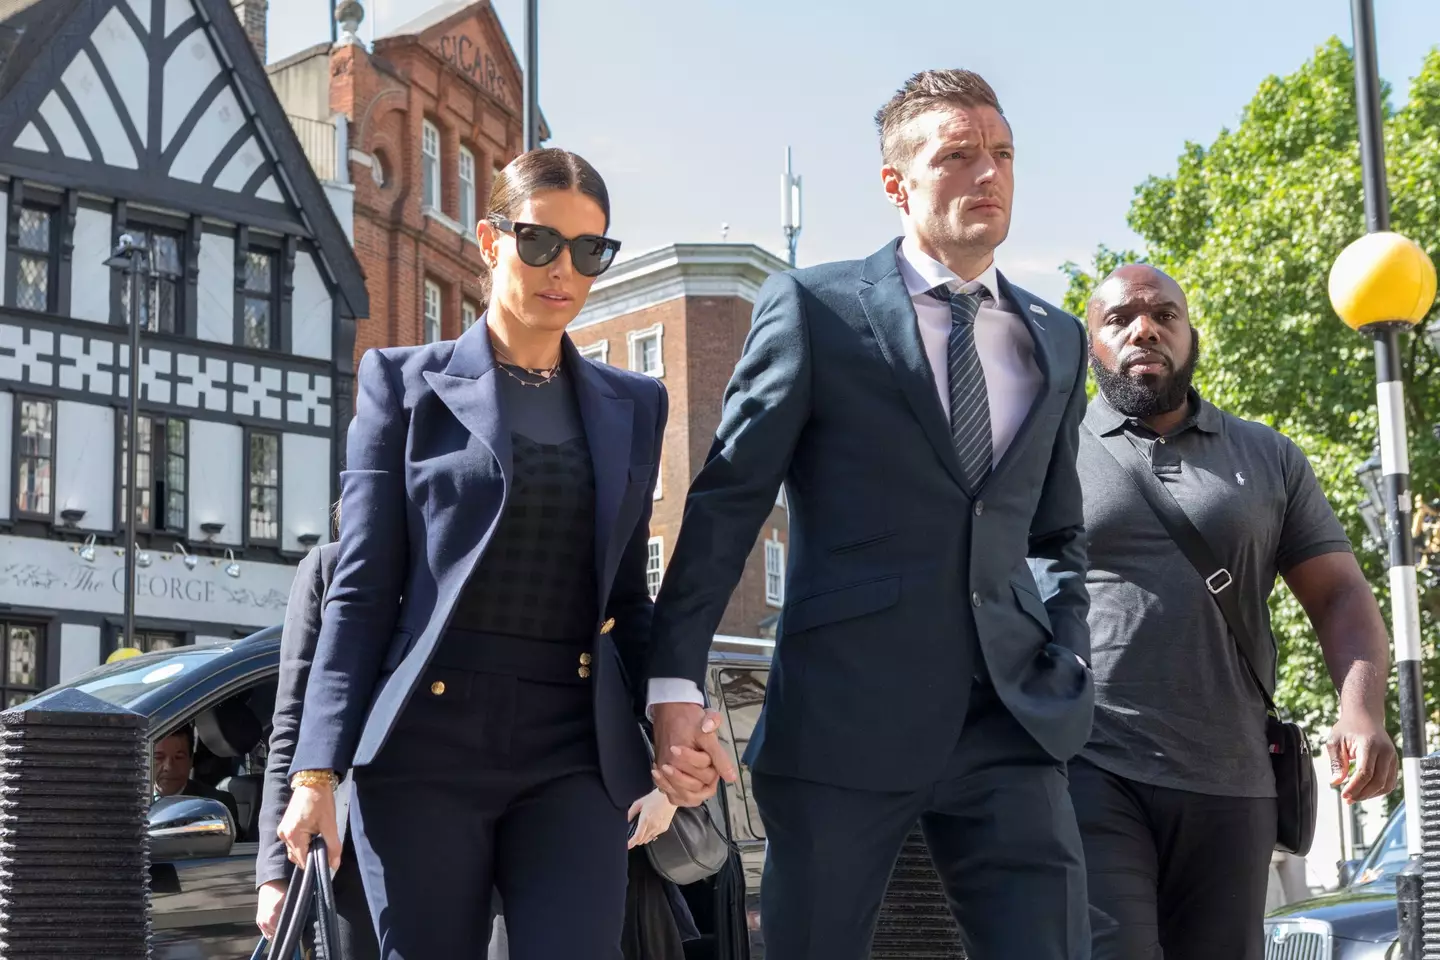 Vardy was mocked by United fans over his wife Rebekah's failed legal battle against Coleen Rooney (Image: Alamy)